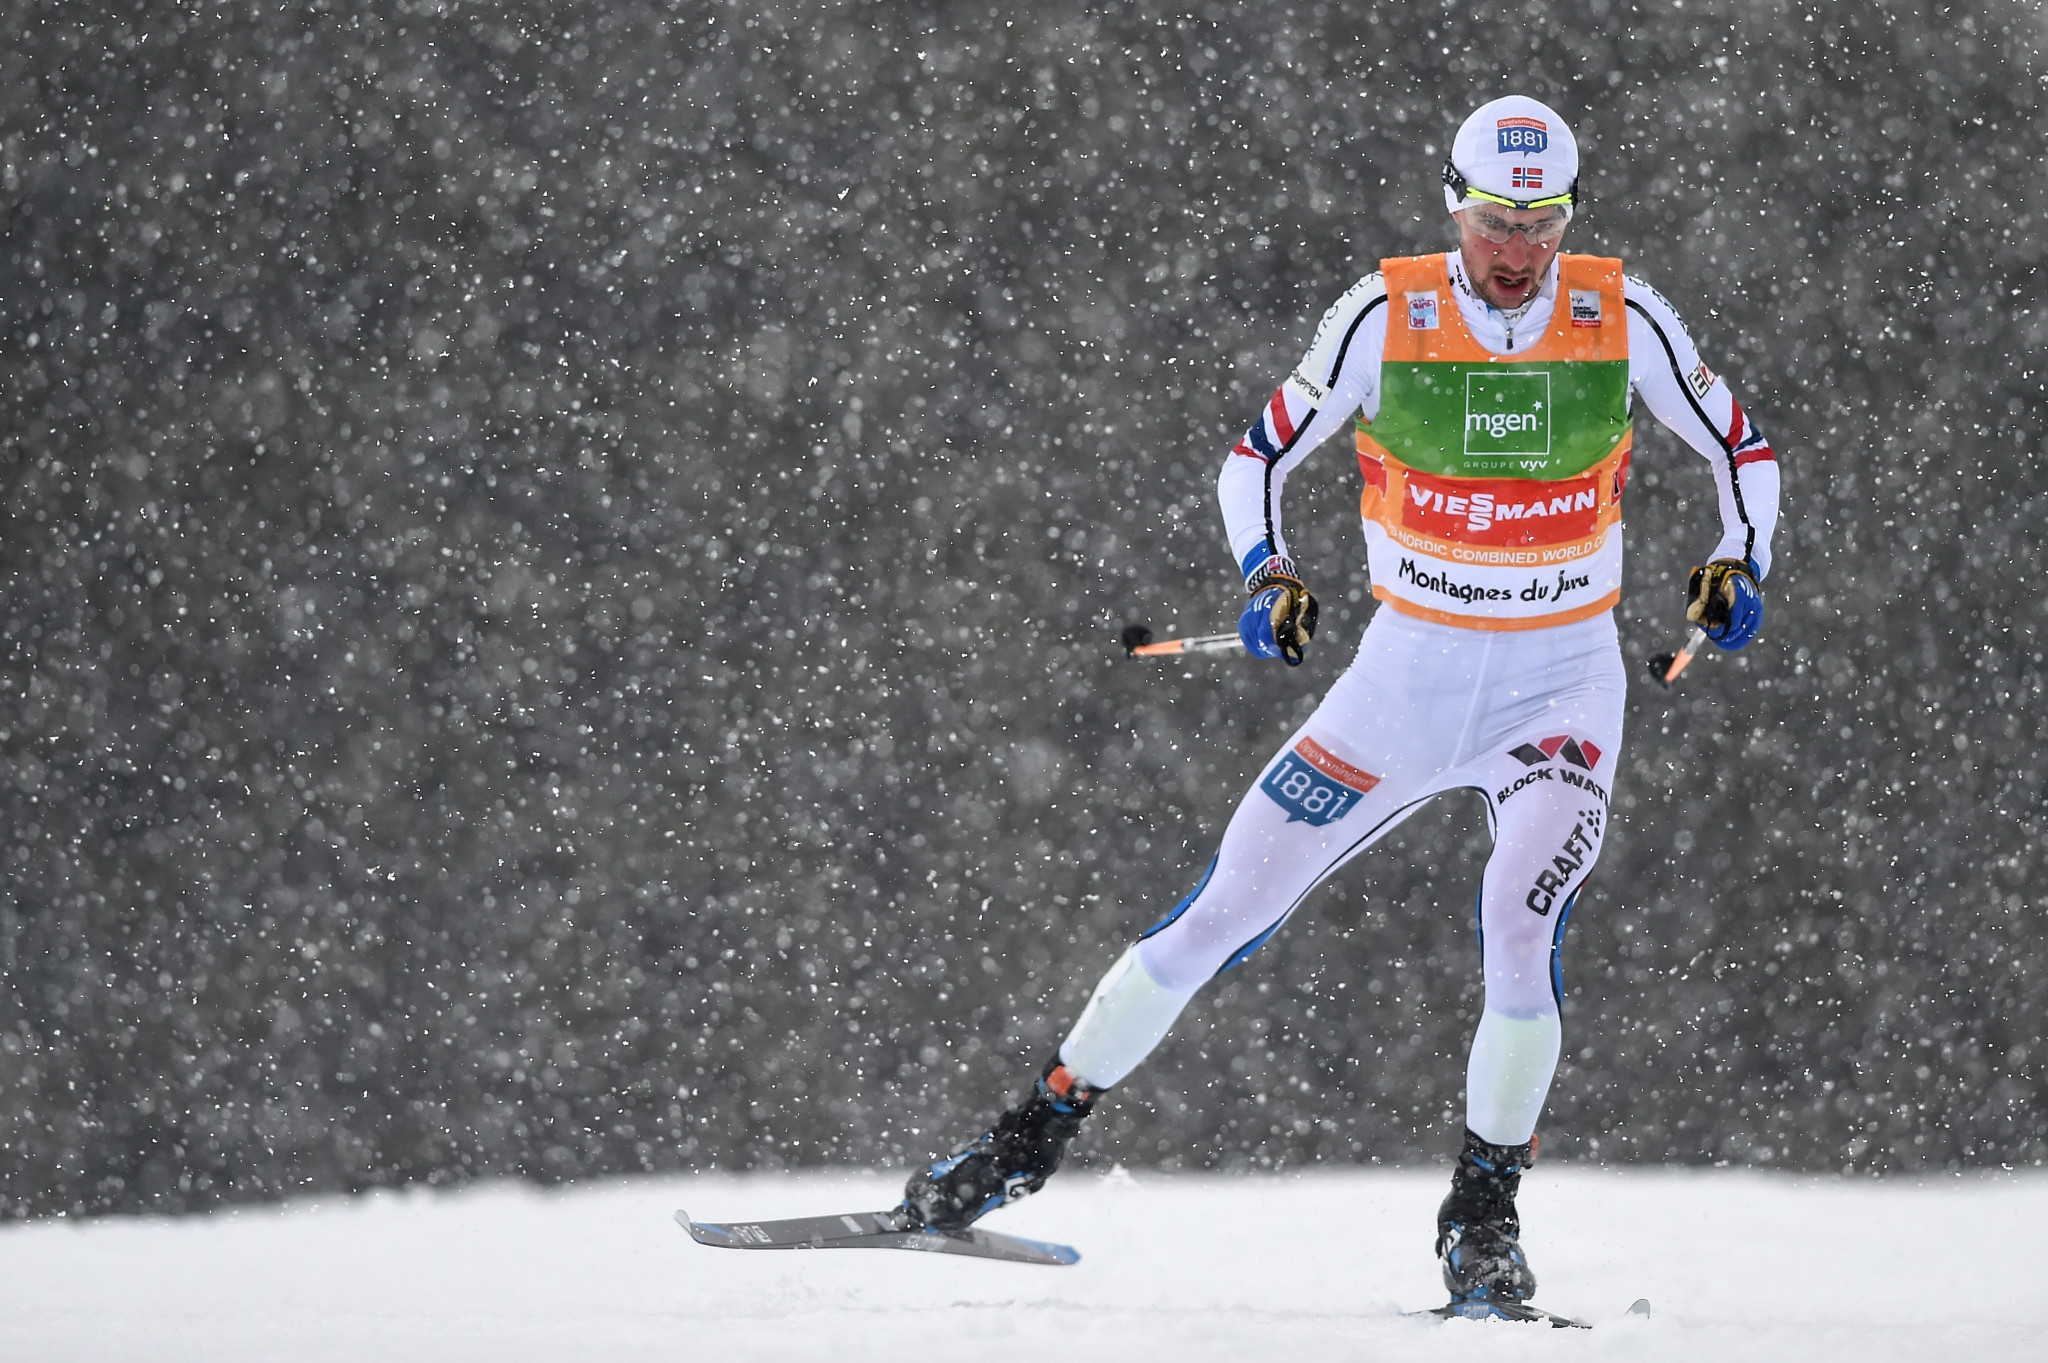 Jan Schmid is the Nordic Combined World Cup leader ©Getty Images